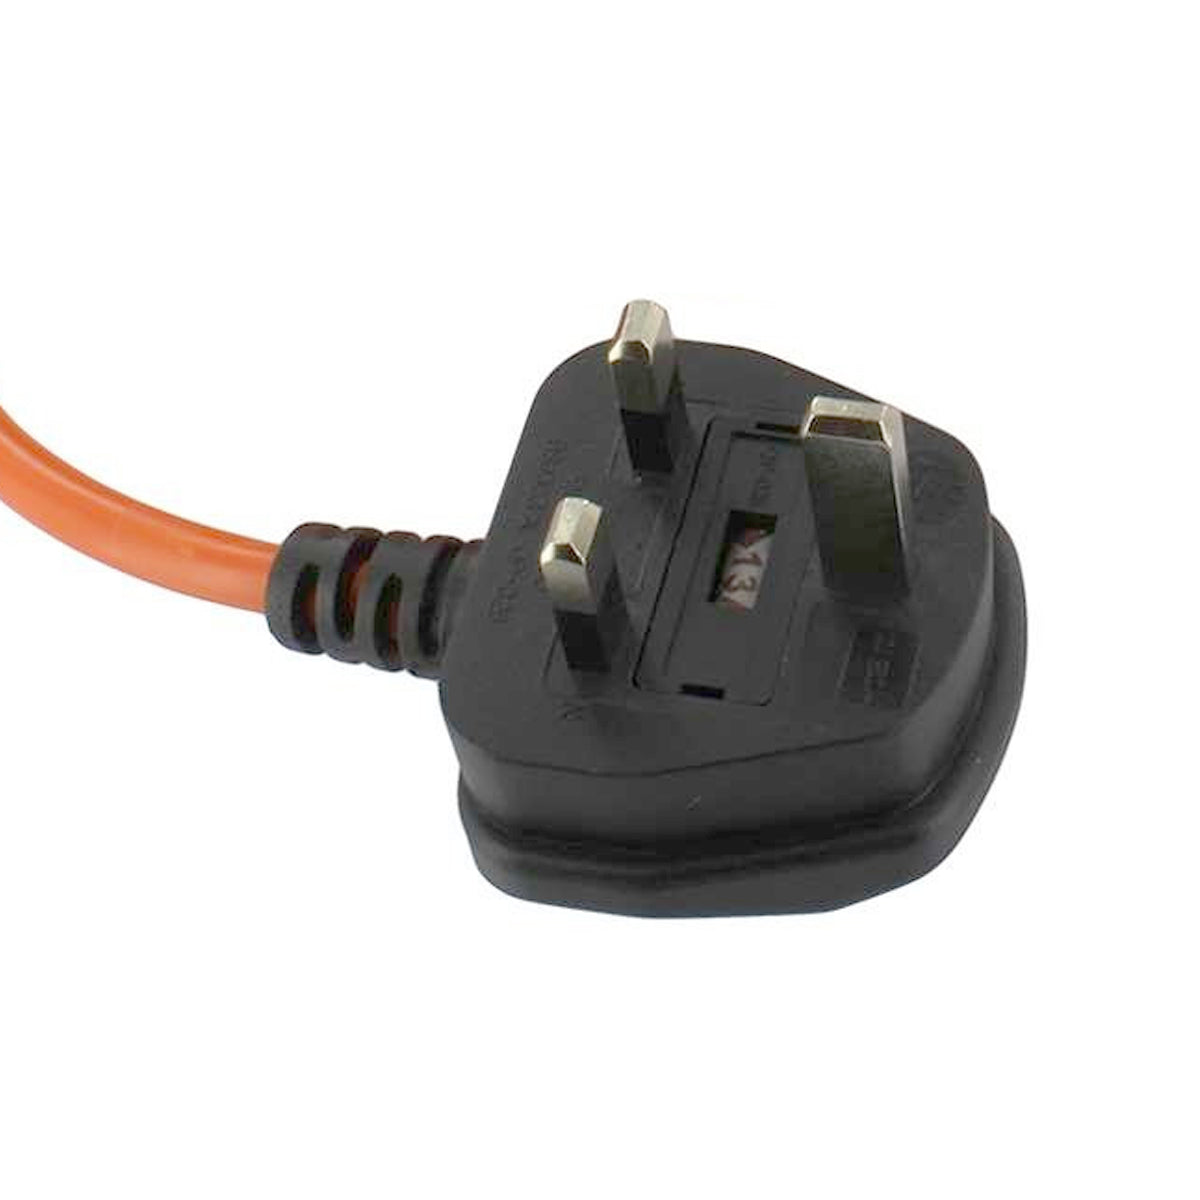 12m Power Cable For Flymo Hover Compact 300 330 350 Lawnmower Extra Long Lead